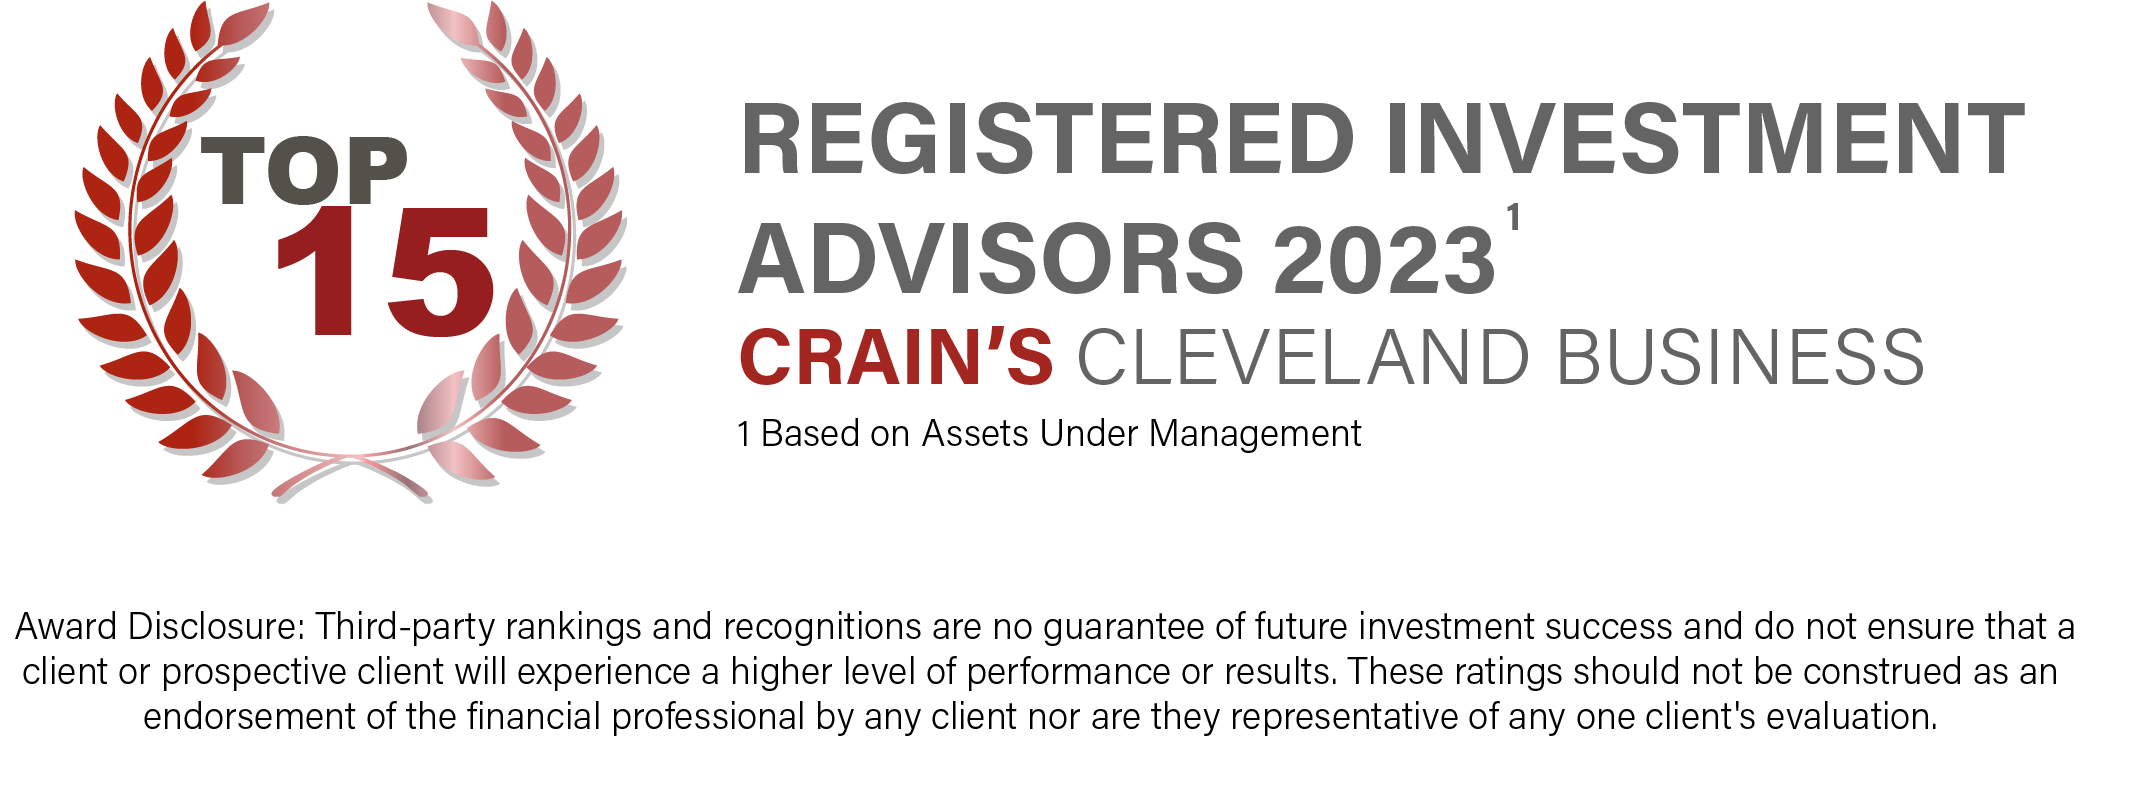 Lineweaver Wealth Advisors proud to be named on Crains Top Advisors list for fifth consecutive year